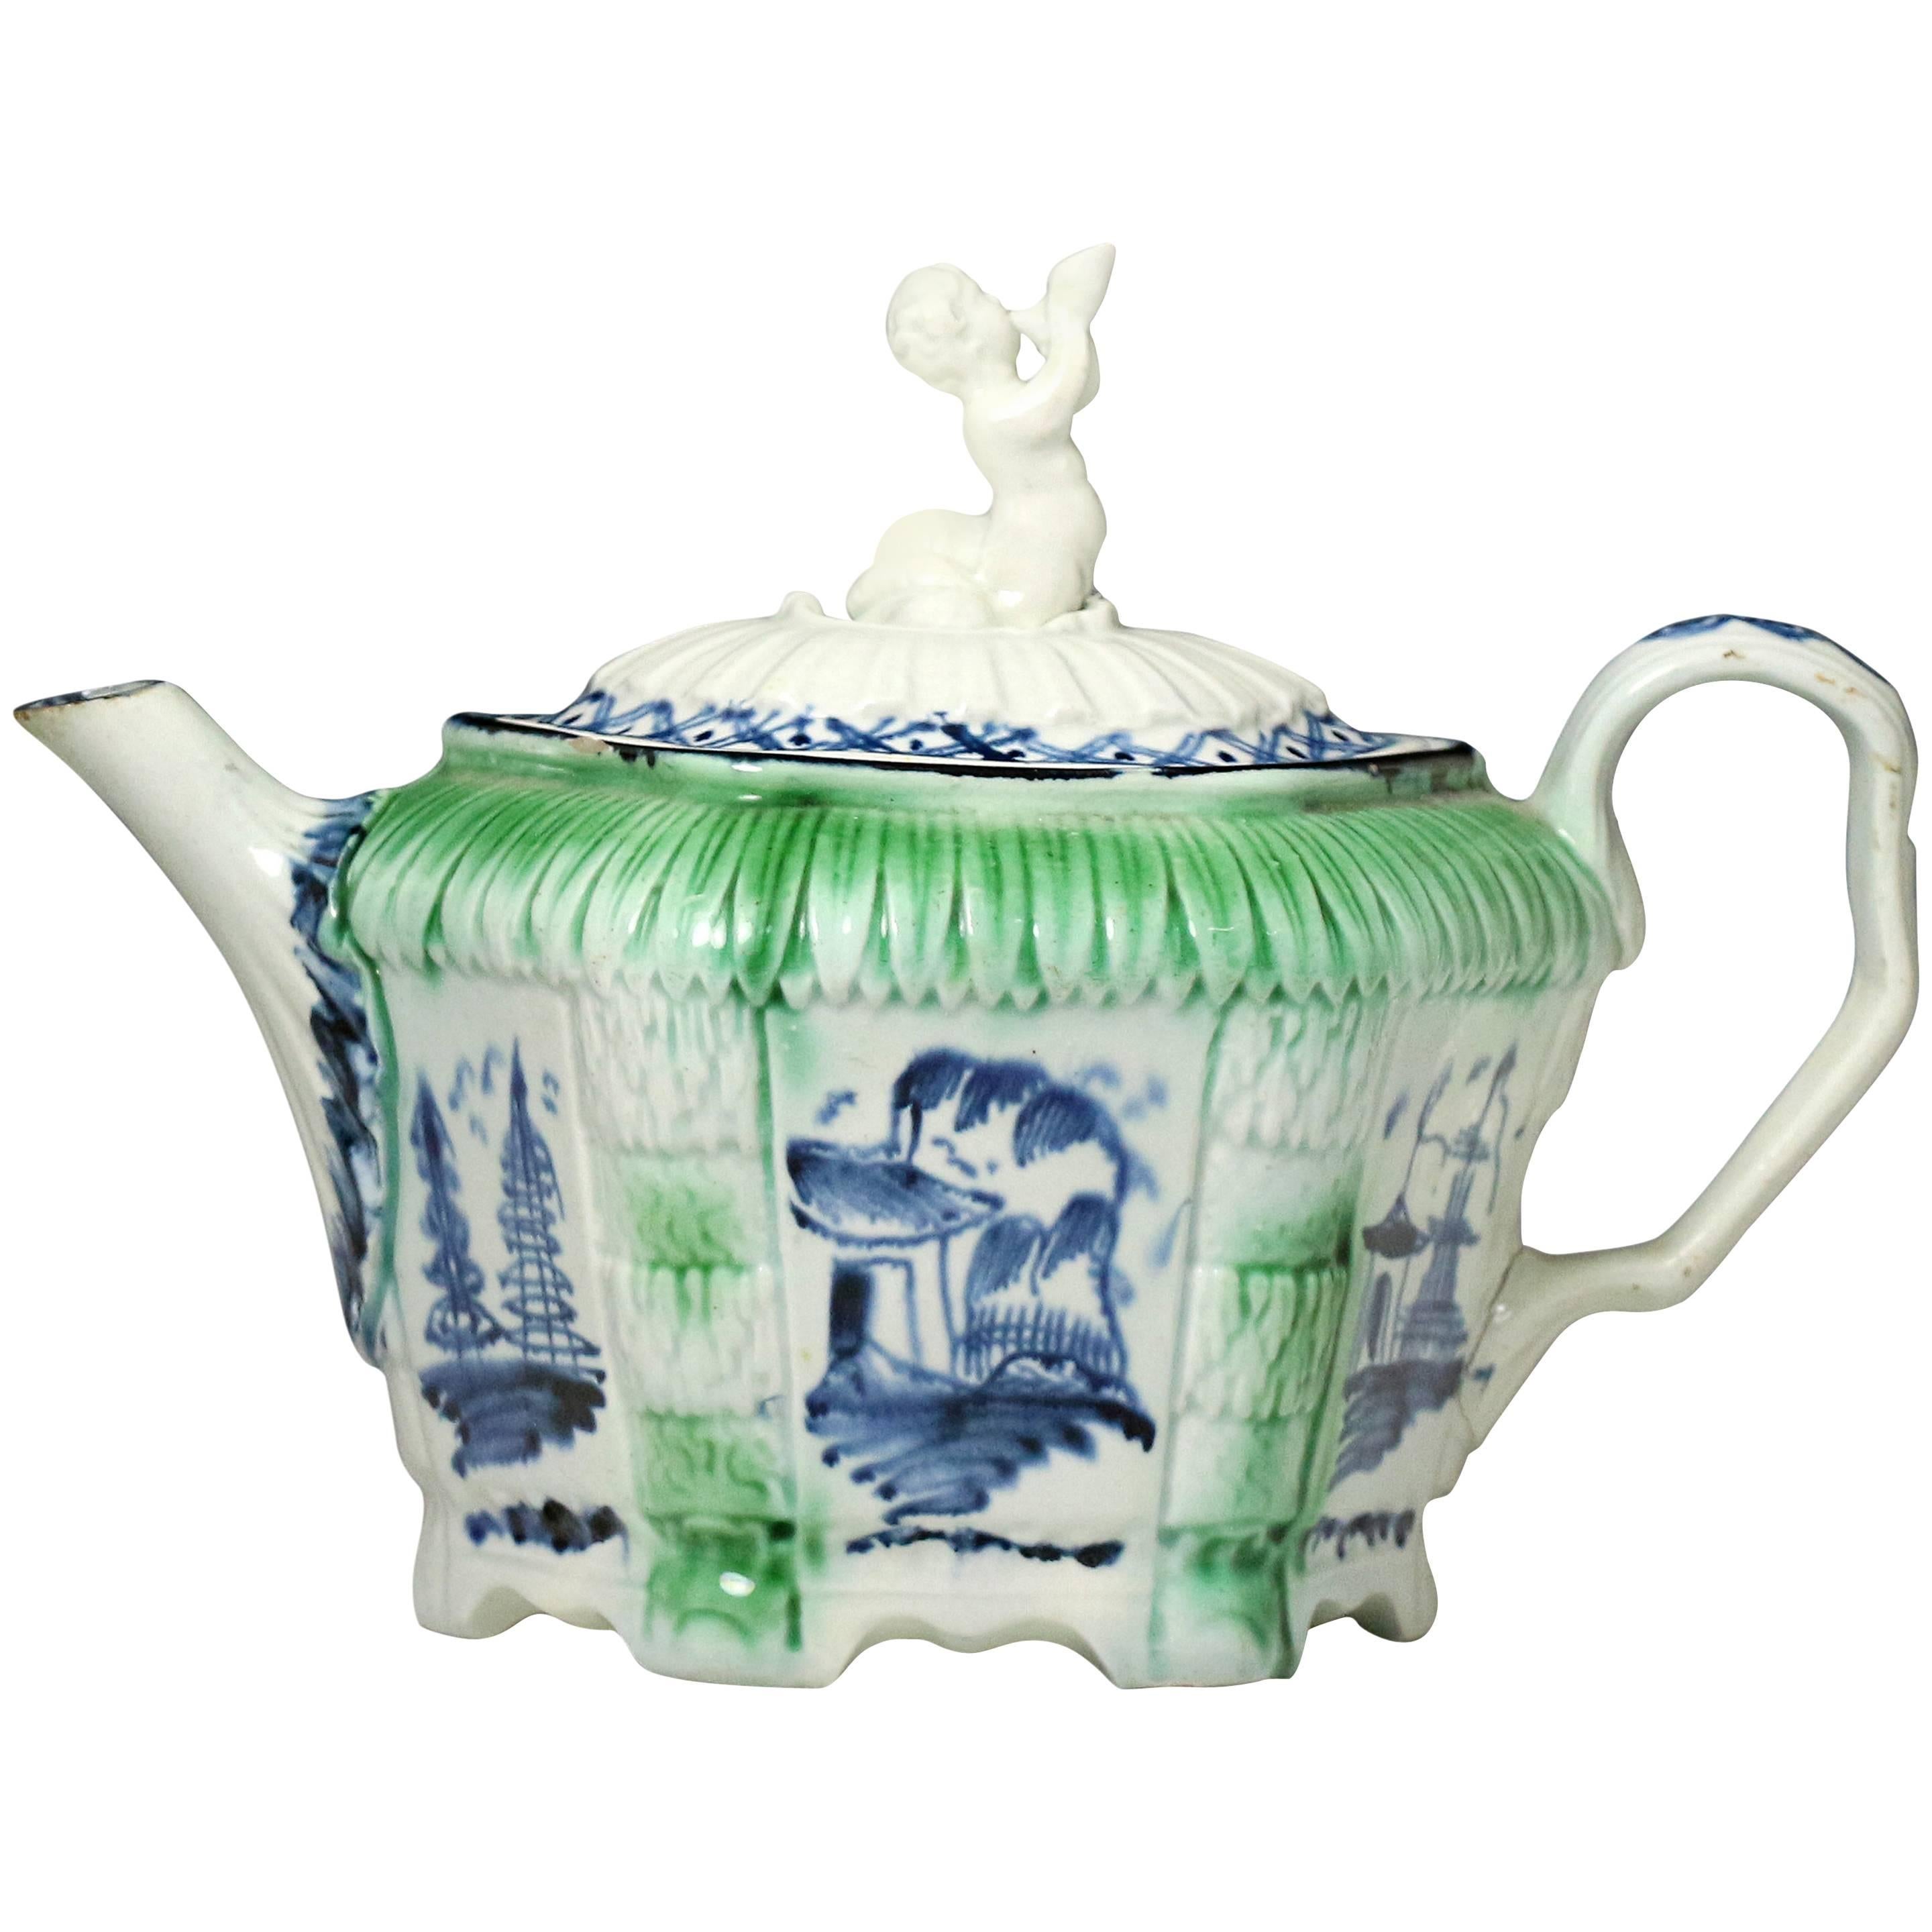 Antique English Pottery Pearlware Teapot, Late 18th Century For Sale